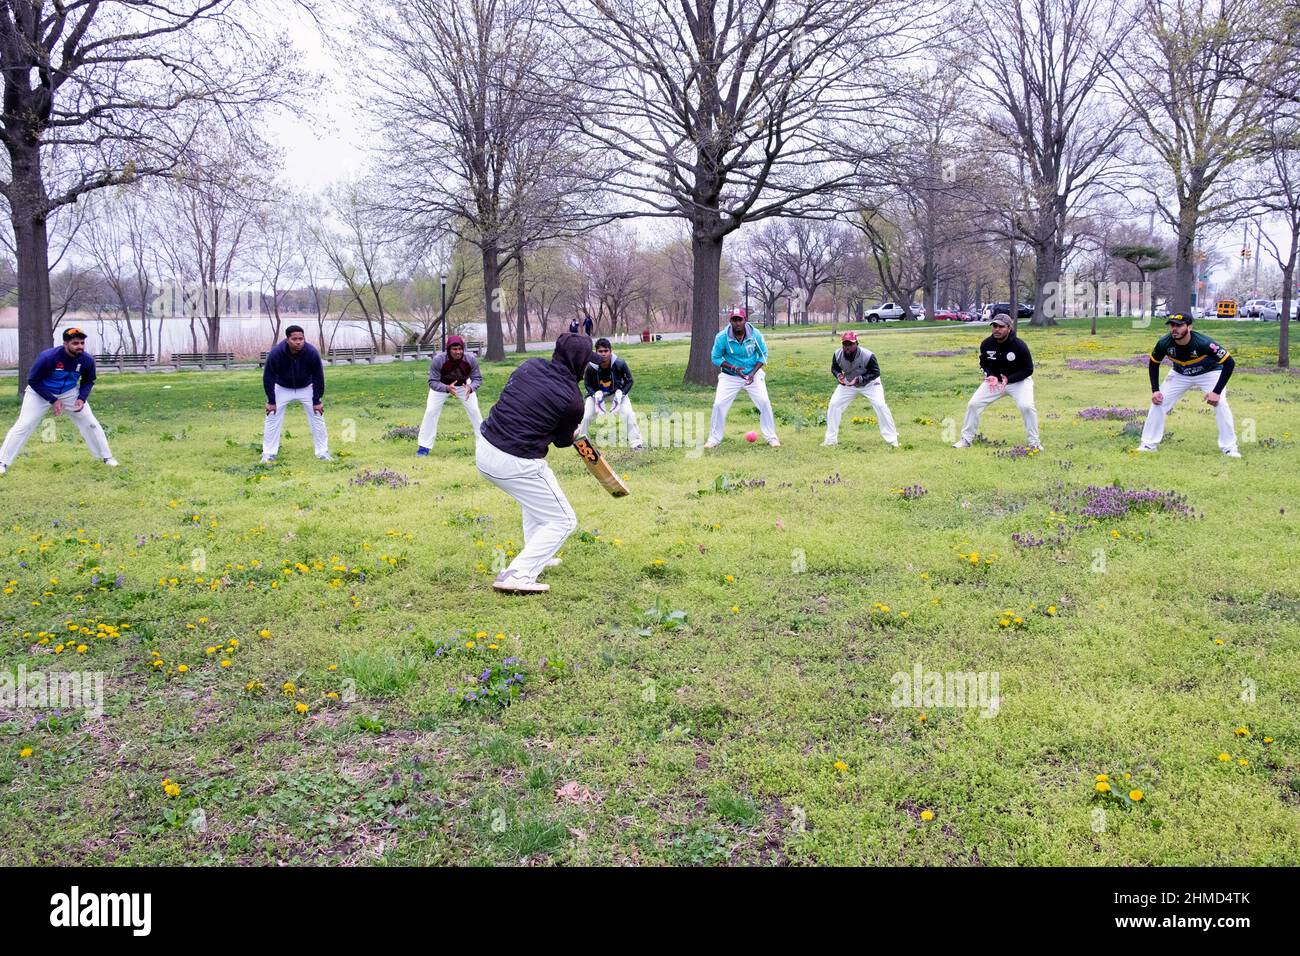 A group of under 25 cricket players warm up by fielding balls in Baisley Pond Park in Jamaica, Queens, New York City. Stock Photo